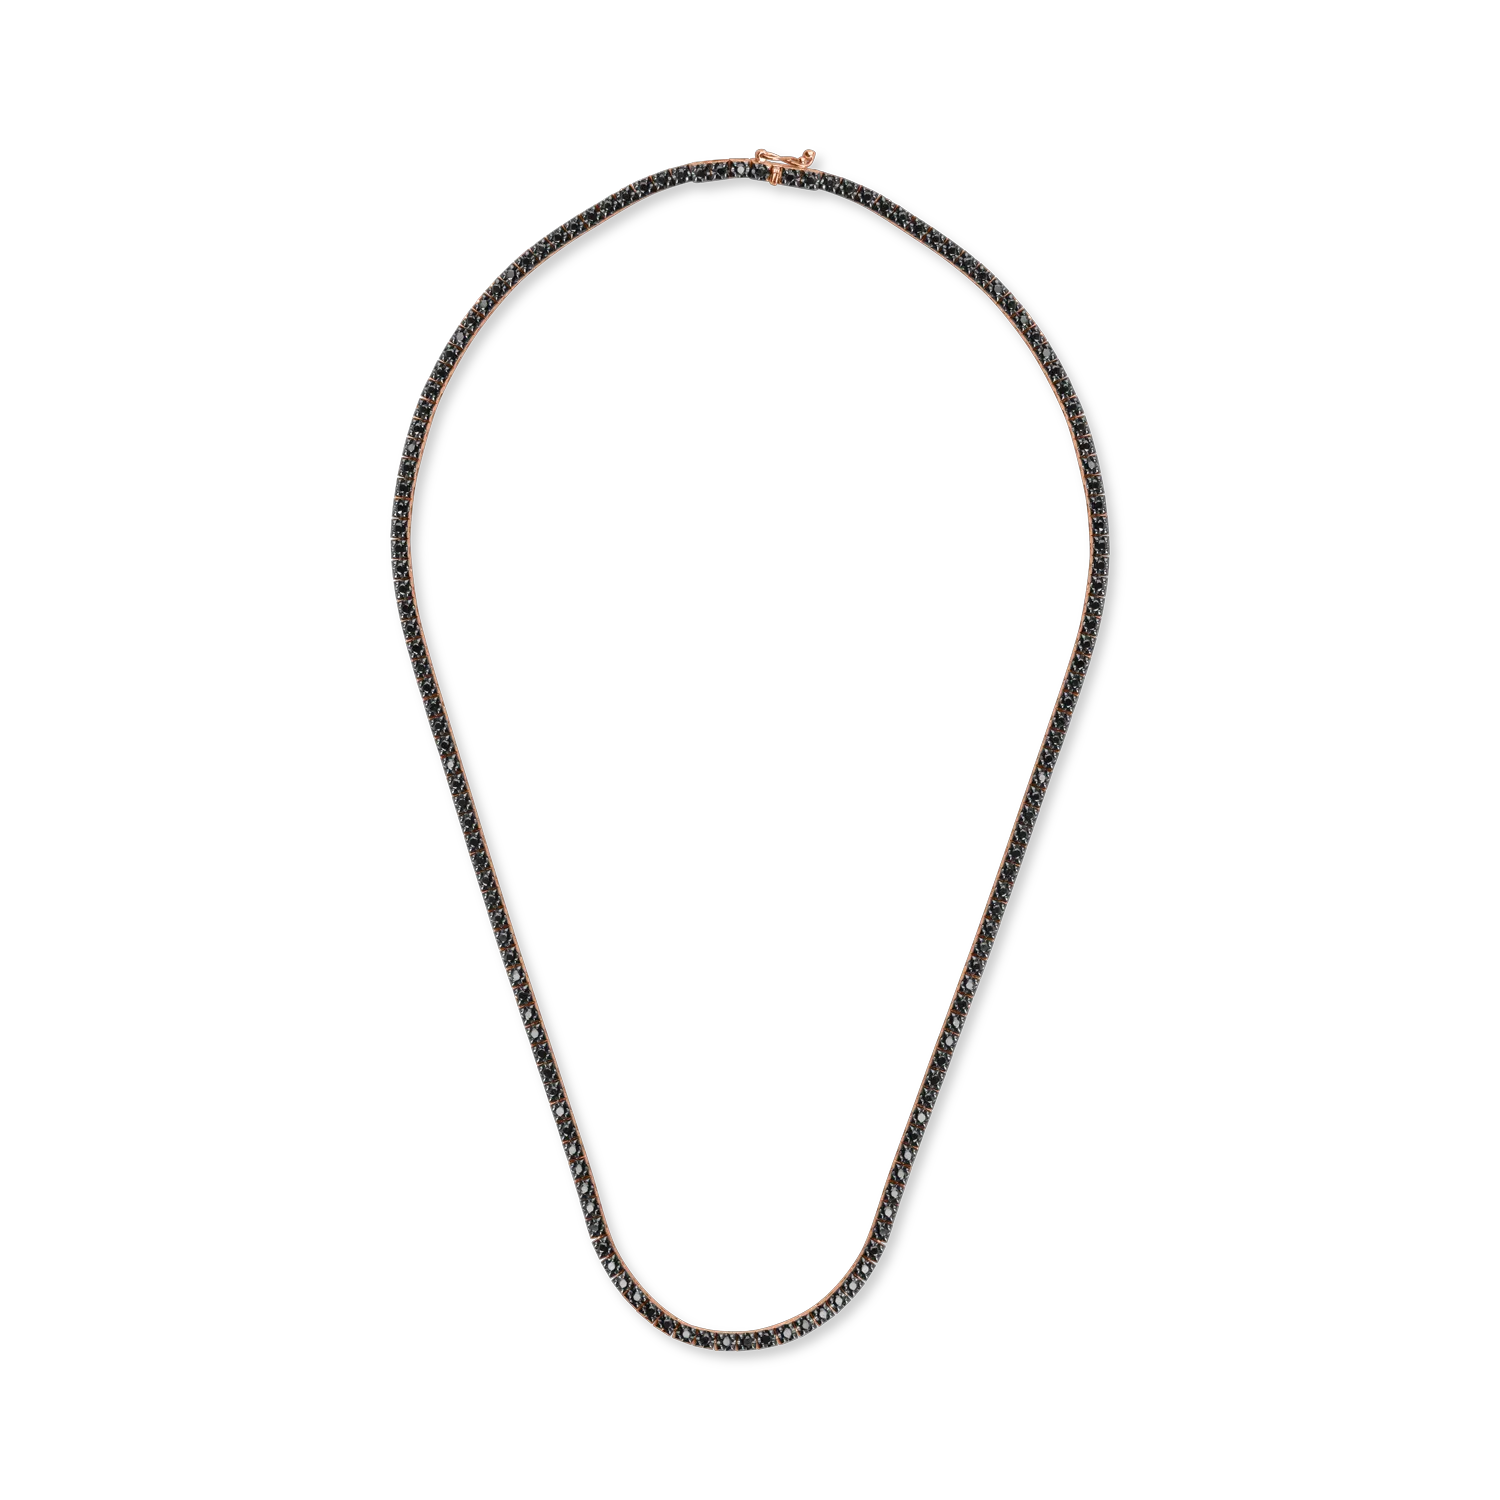 Rose-black gold tennis necklace with 3.06ct black diamonds